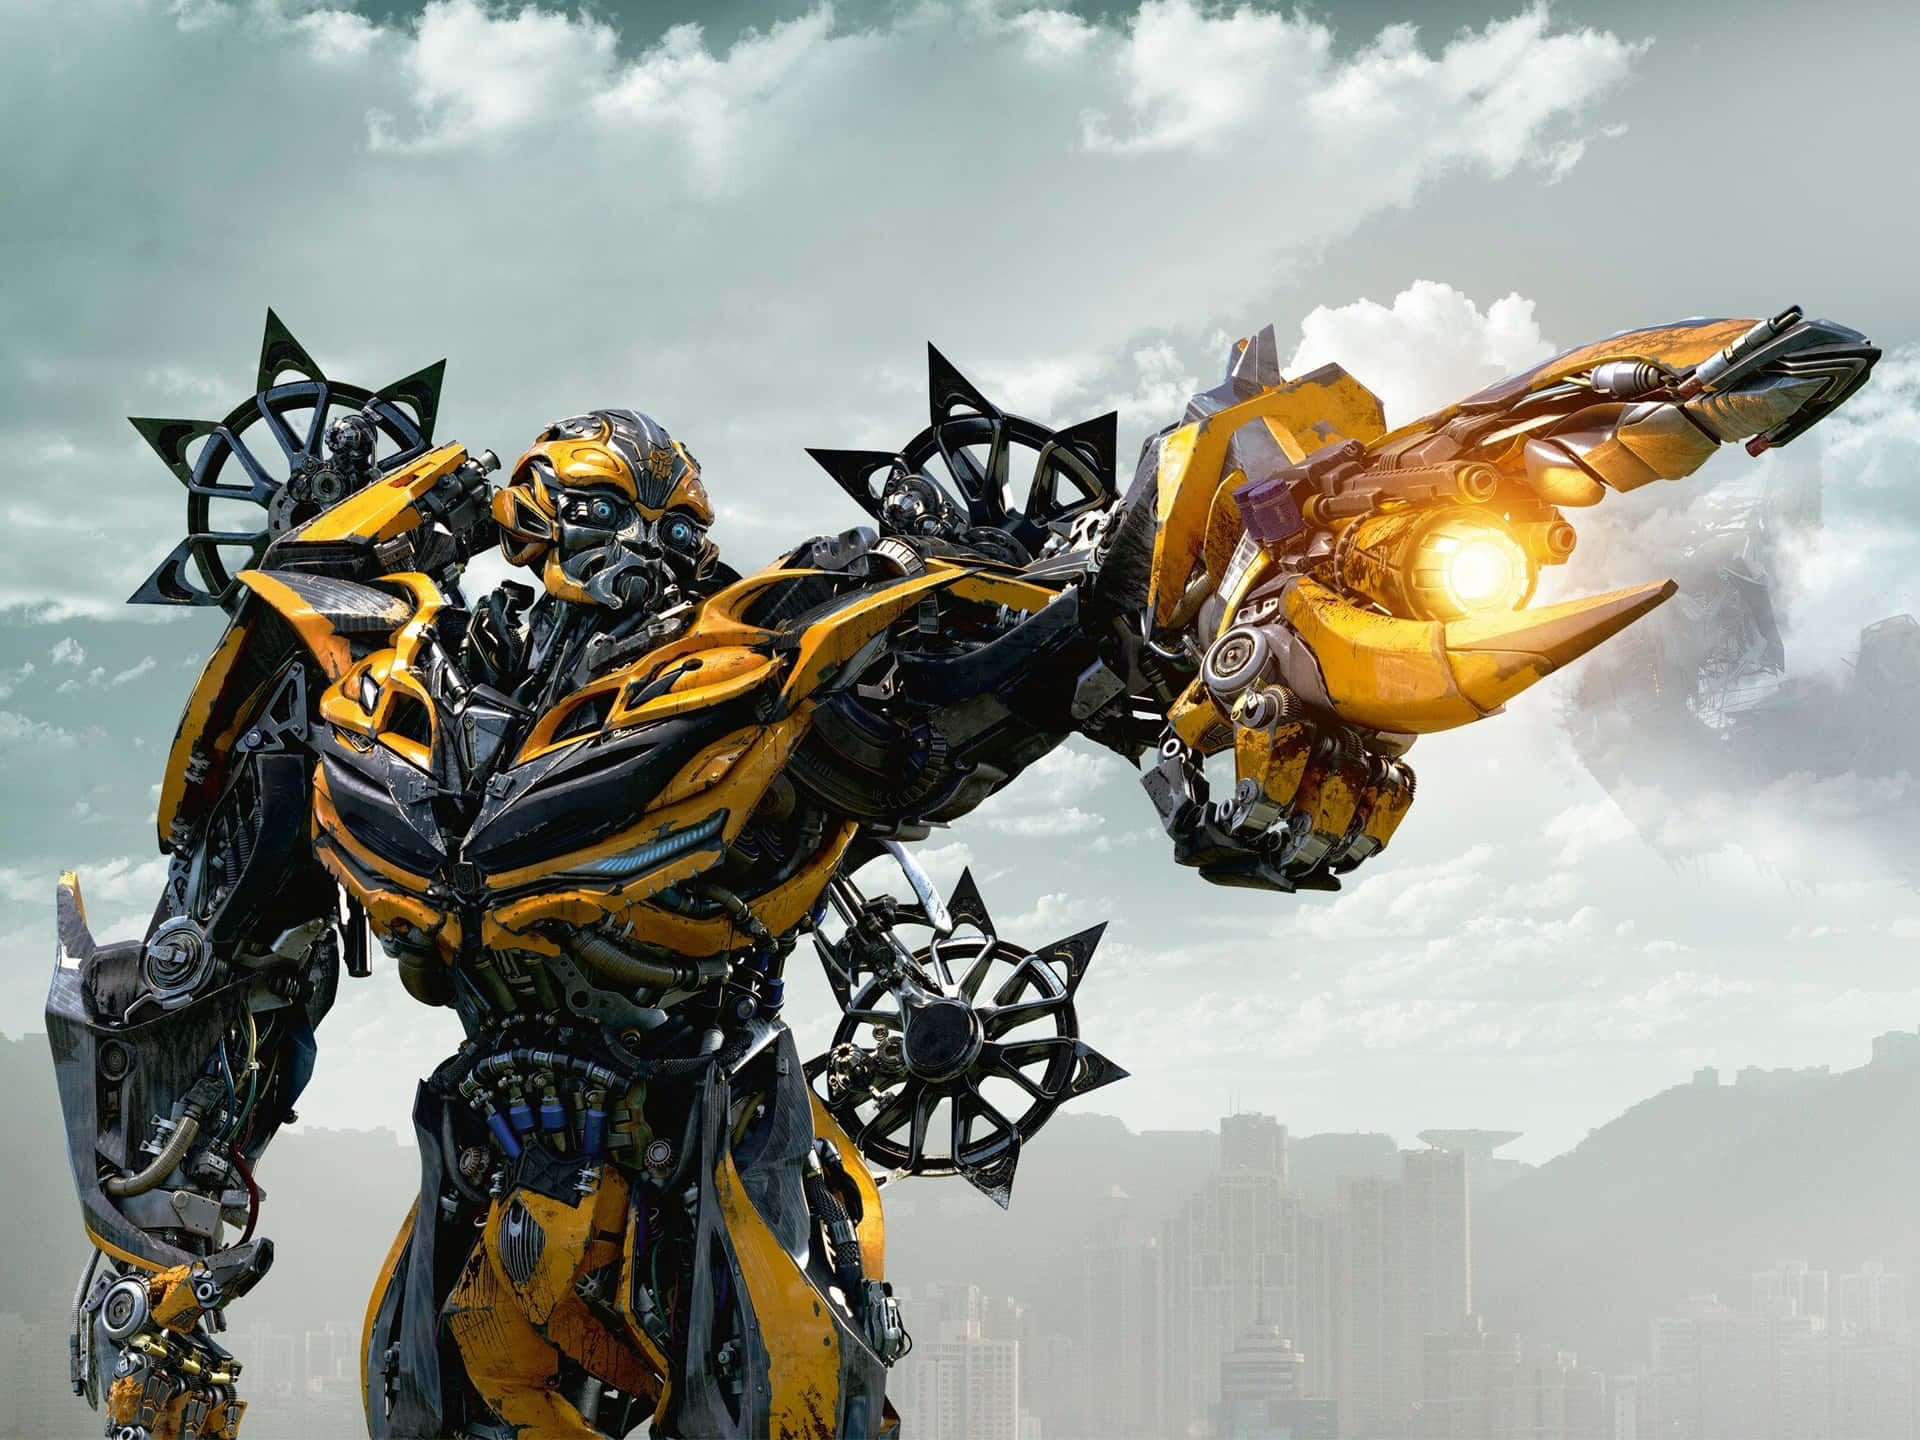 'Powerful allies: Optimus Prime and Bumblebee team up to protect Earth in Transformers.'